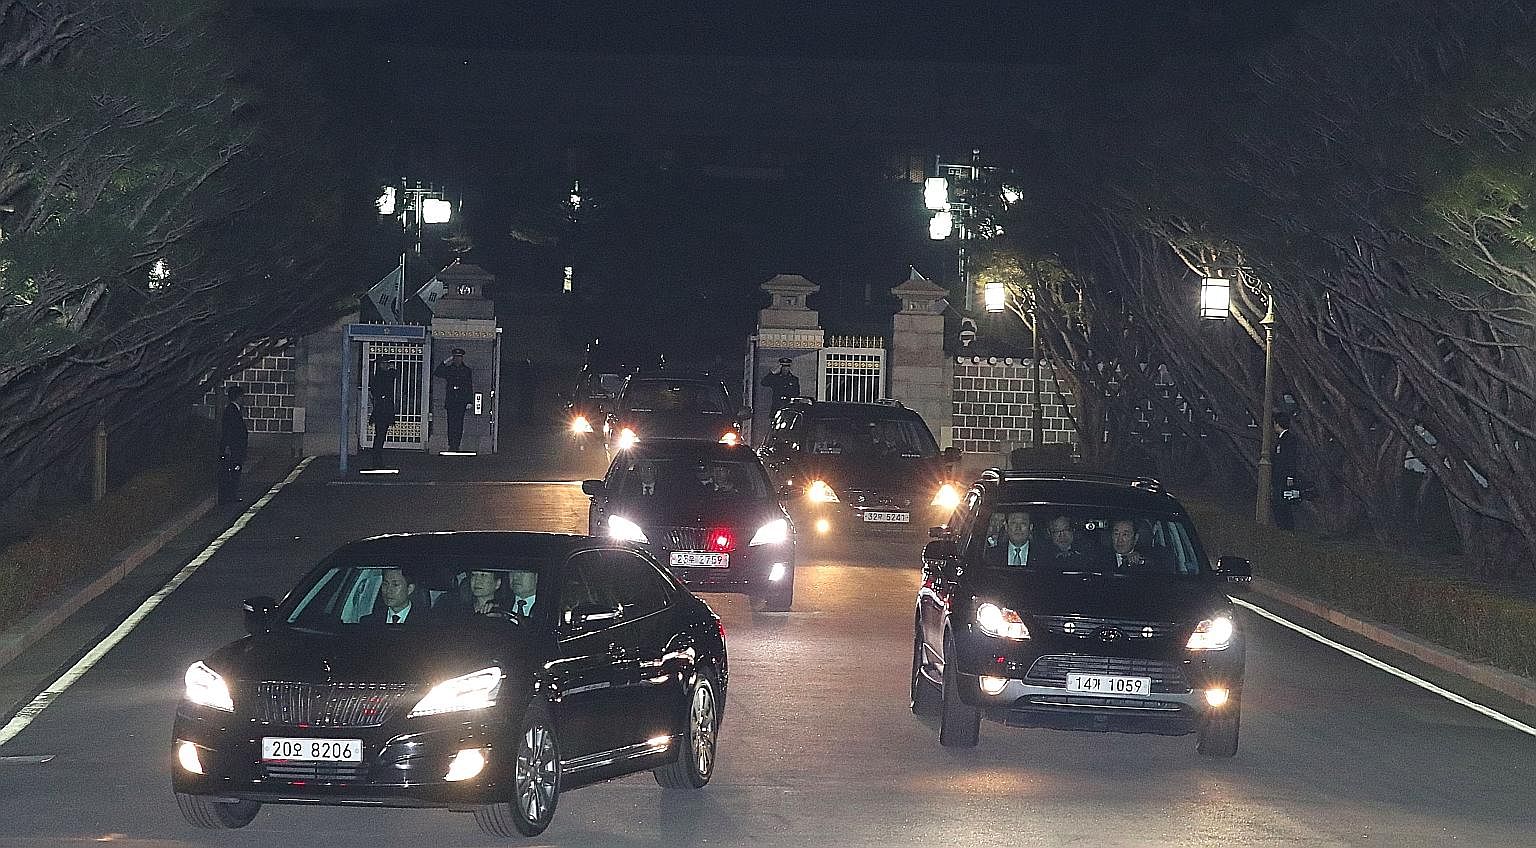 South Korea's impeached president Park Geun Hye (in car at left) being driven away from the presidential Blue House as she returned to her private residence in Seoul on Sunday, two days after the Constitutional Court's verdict confirming her removal 